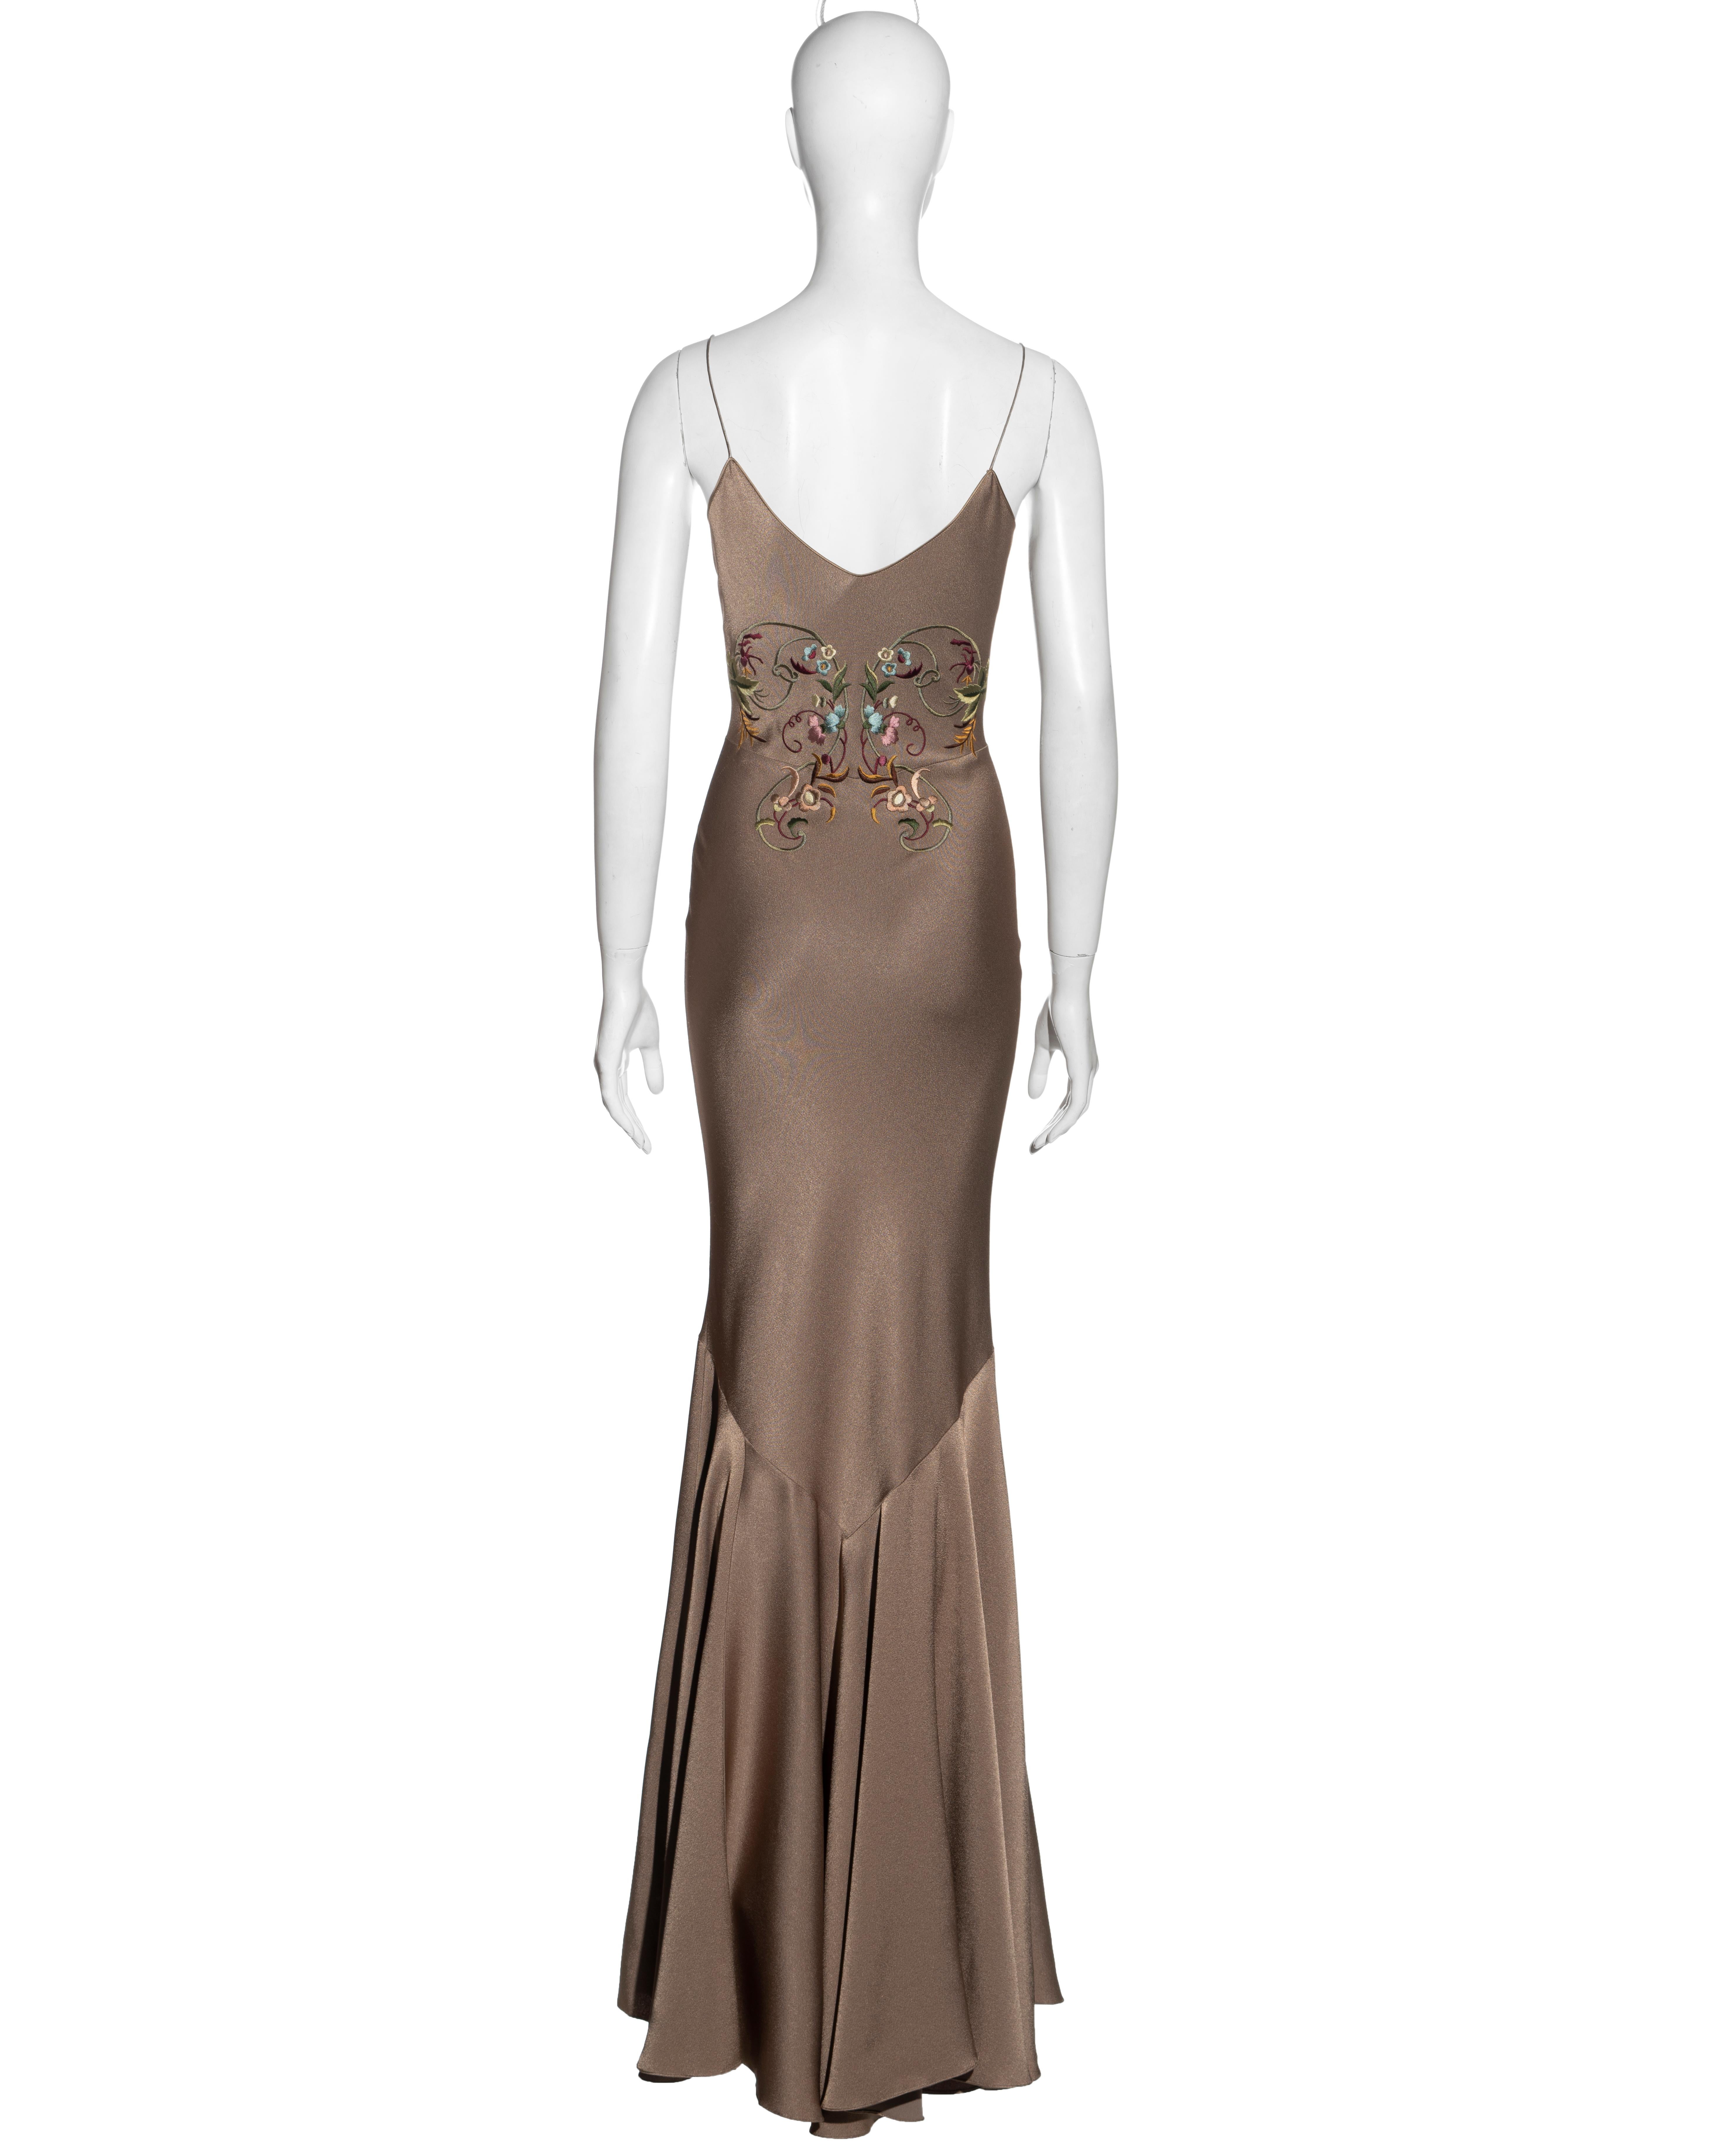 Women's John Galliano taupe satin crepe evening dress with floral embroidery, ss 2003 For Sale